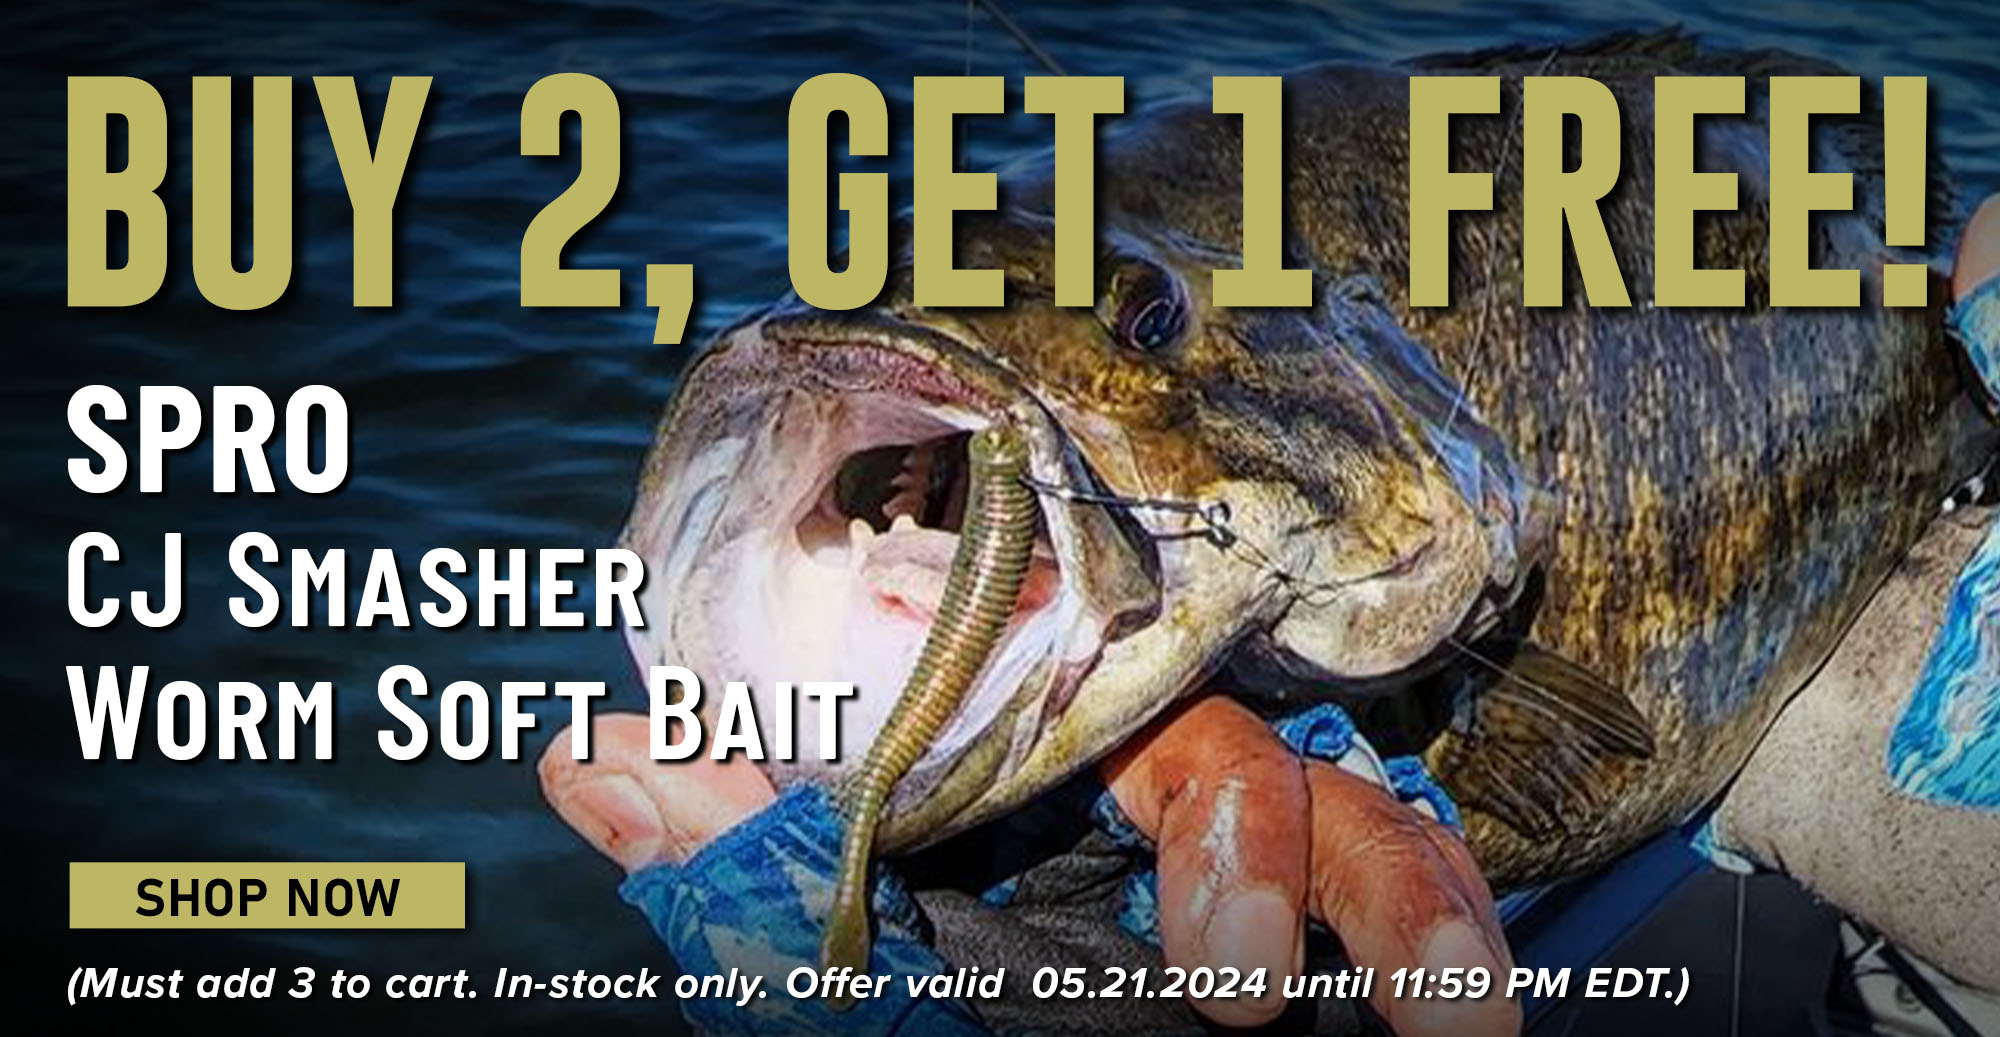 Buy 2, Get 1 Free! SPRO CJ Smasher Worm Soft Bait Shop Now (Must add 3 to cat. In-stock only. Offer valid 05.21.2024 until 11:59 PM EDT.)